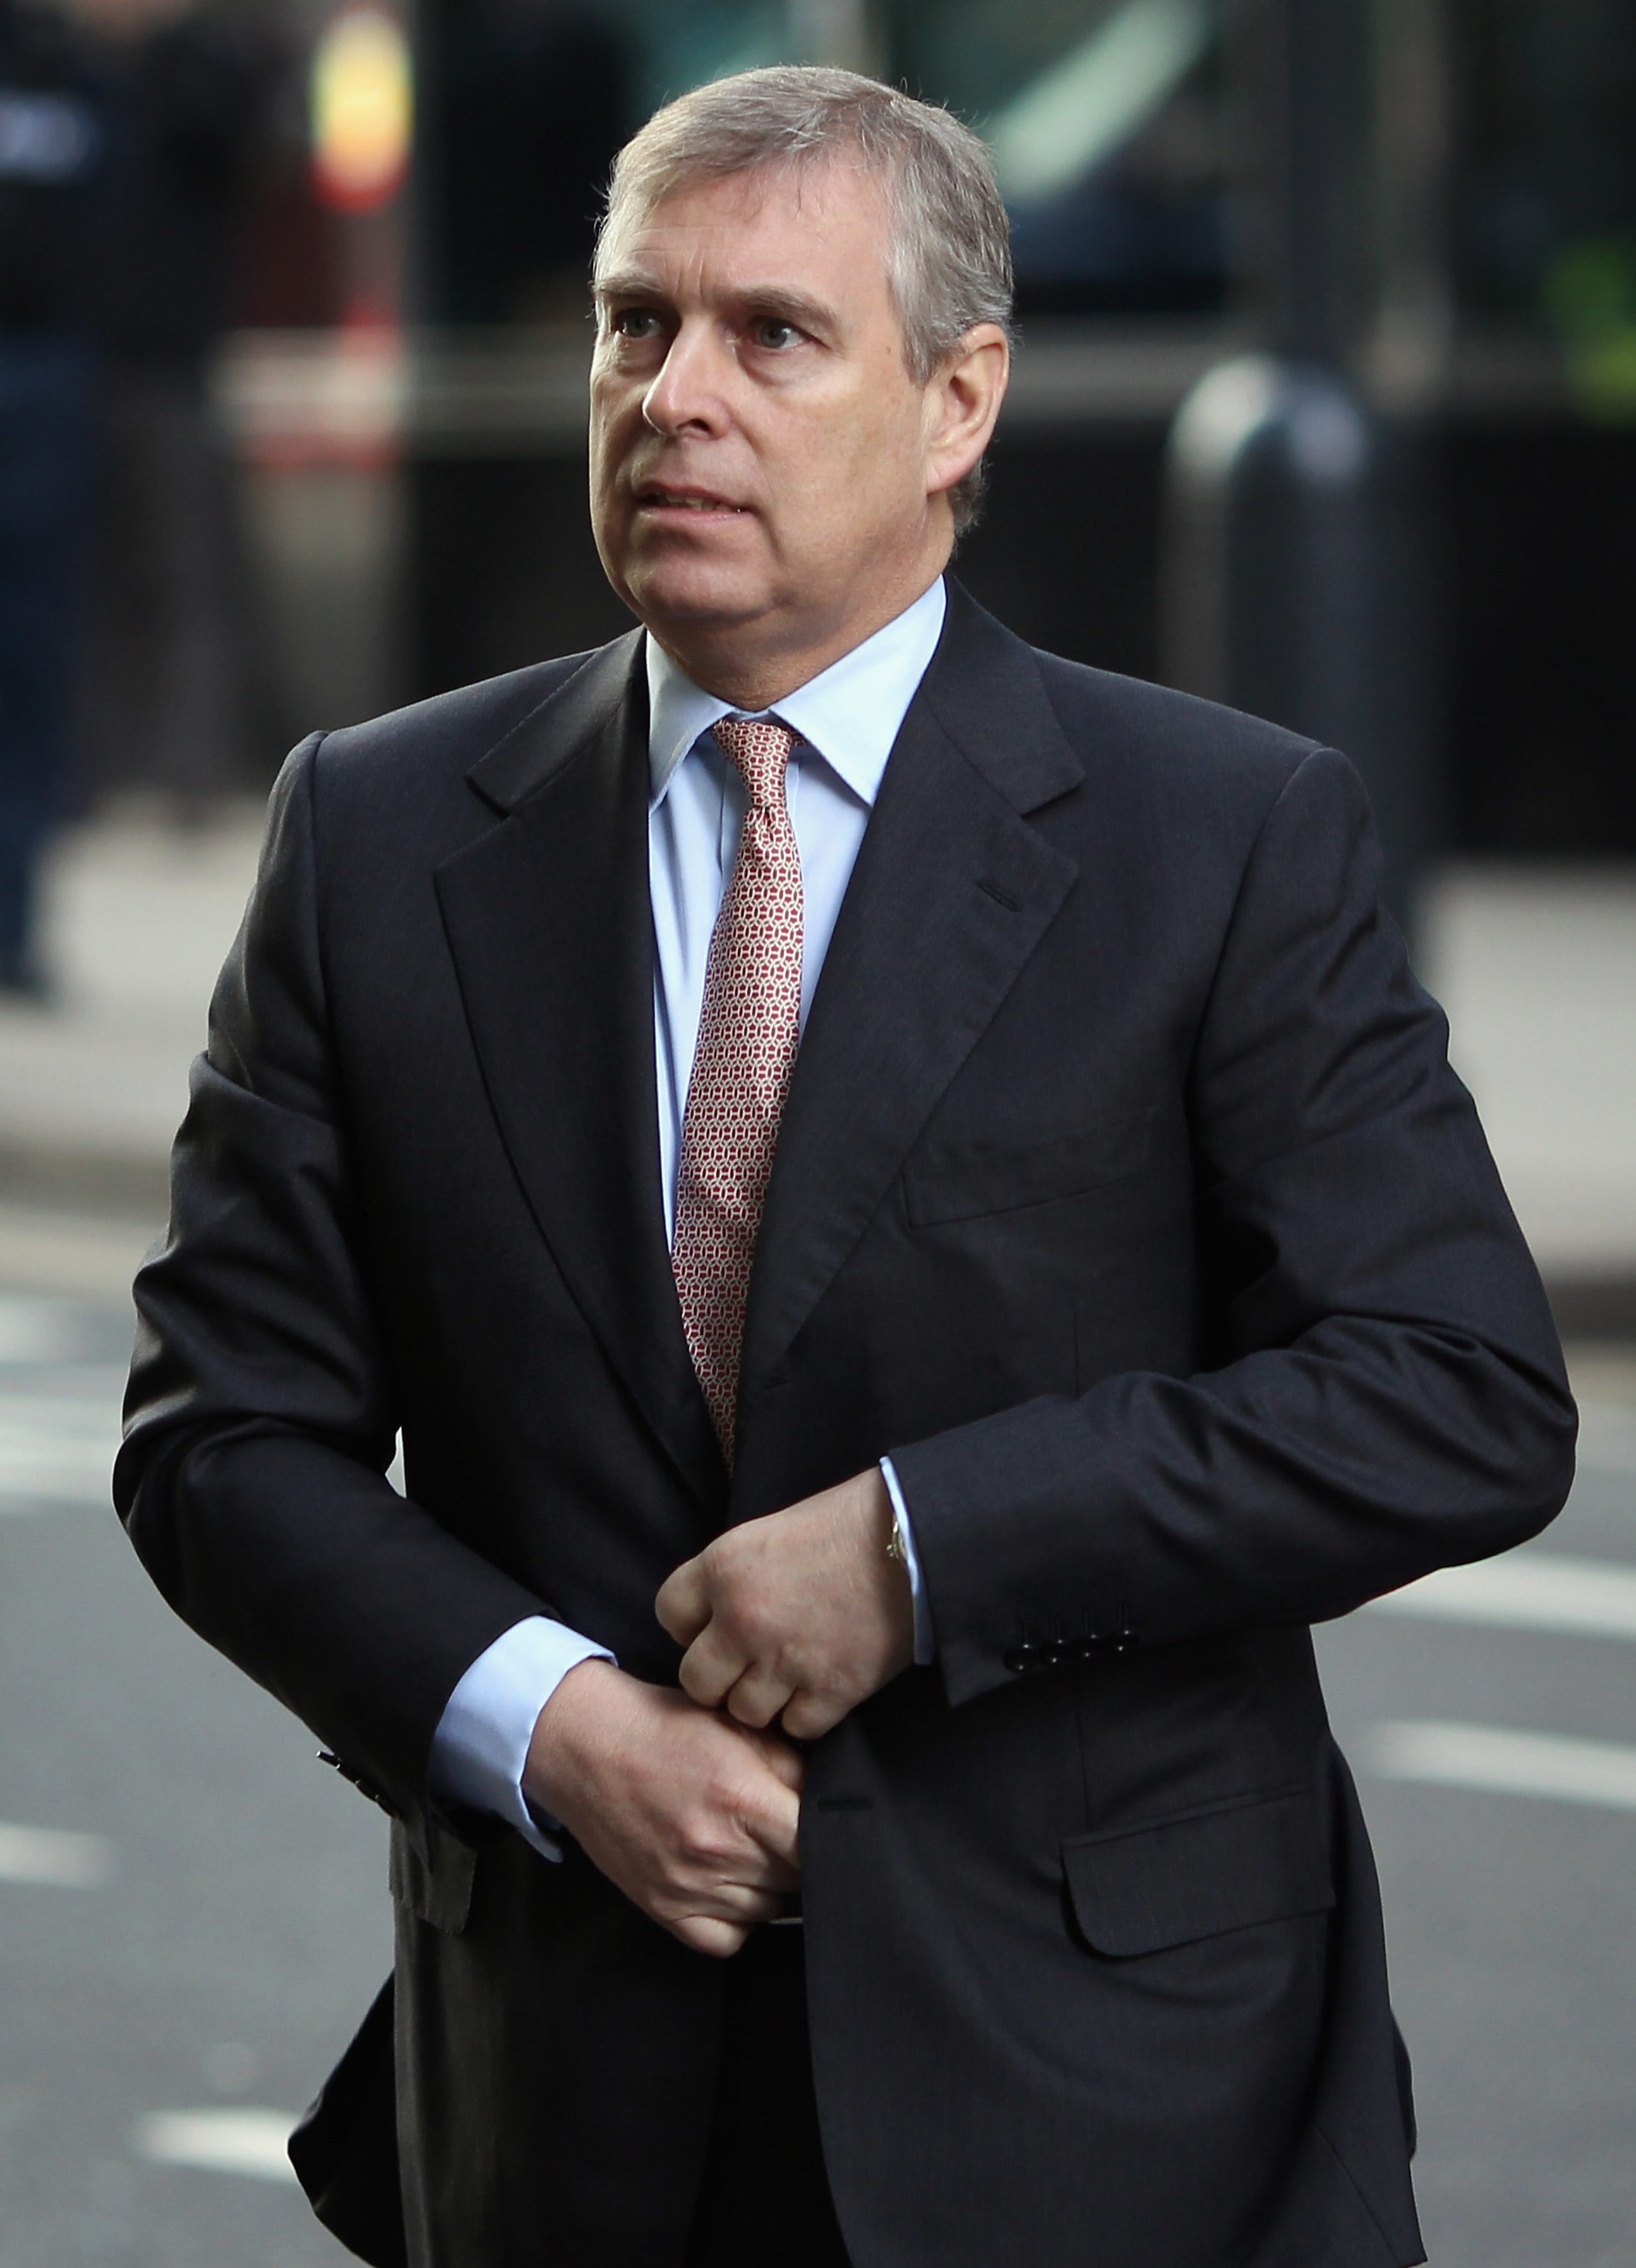 Prince Andrew The Duke of York arrives at the Headquarters of CrossRail in Canary Wharf on March 7, 2011 in London, England. Prince Andrew is under increasing pressure after a series of damaging revelations about him, including criticism over his friendship with convicted sex offender Jeffrey Epstein, an American financier surfaced. (Photo by Dan Kitwood/Getty Images)